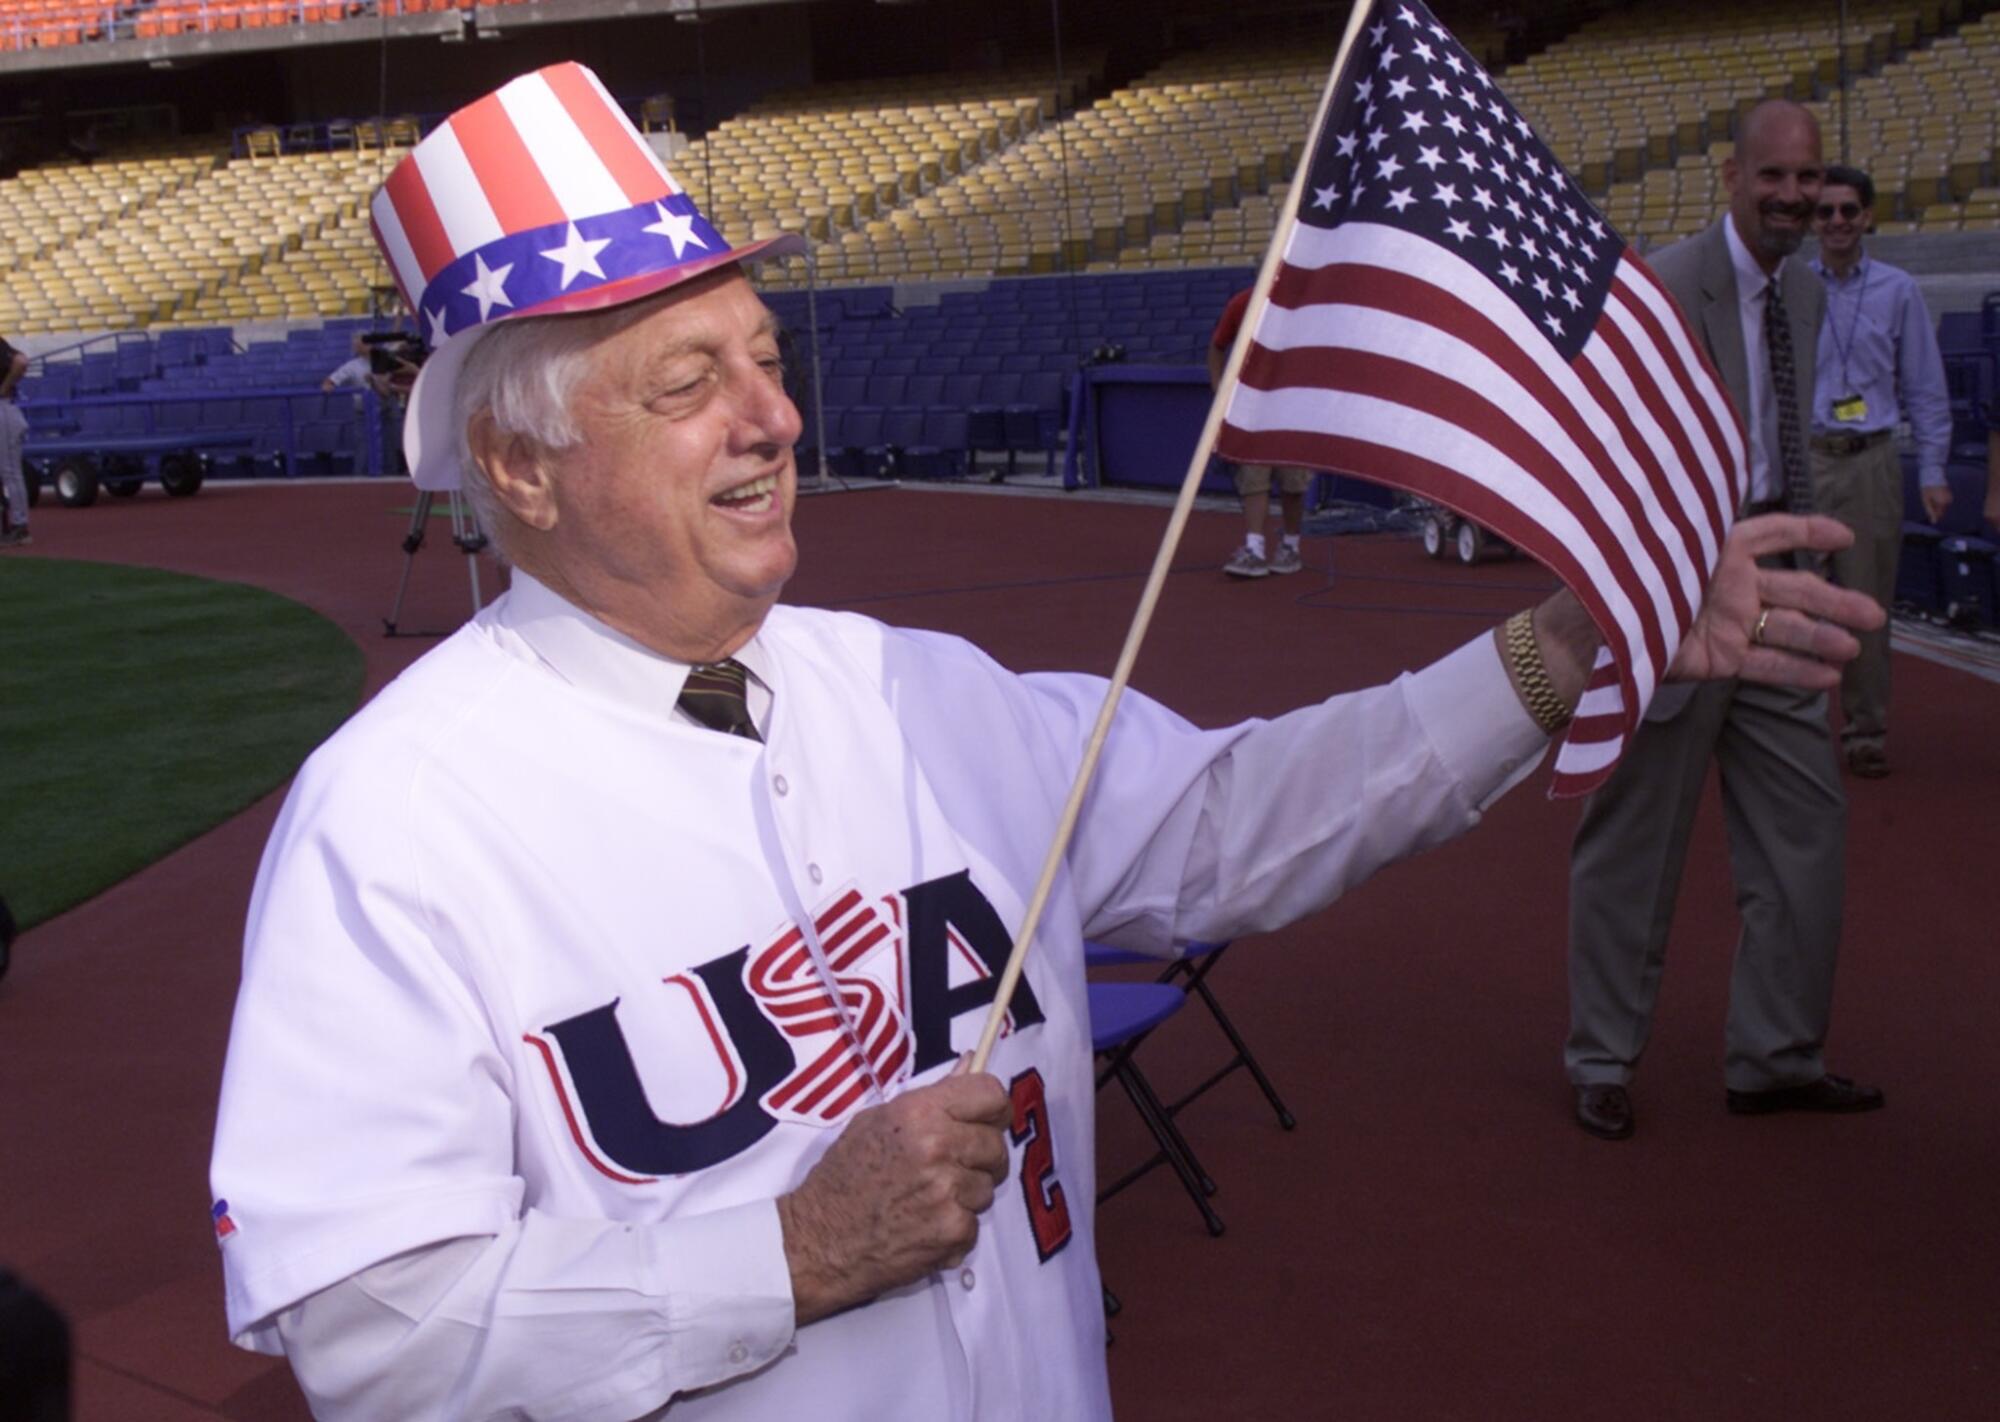 Tom Lasorda shows his patriotic side after being named manager of the 2000 U.S. Olympic baseball team.